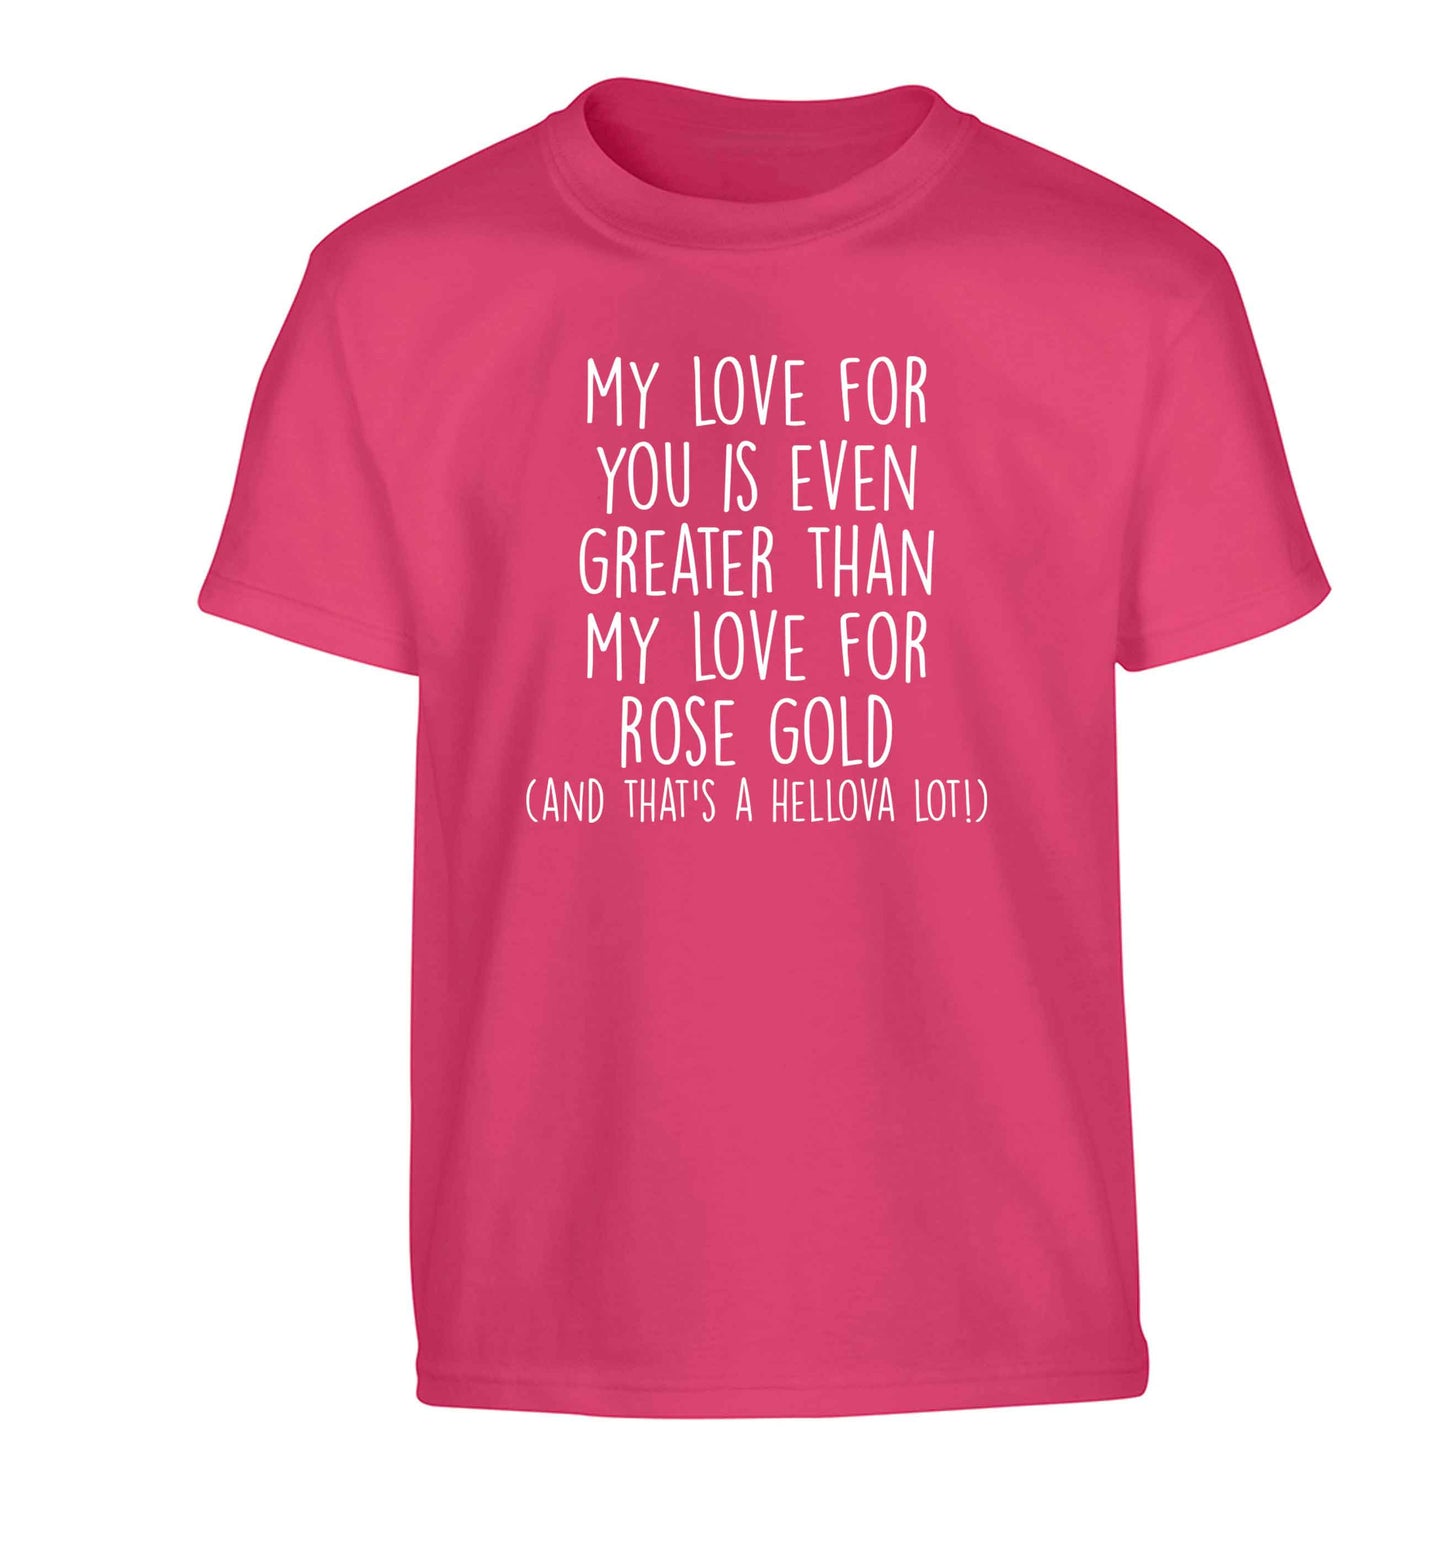 My love for you is even greater than my love for rose gold (and that's a hellova lot) Children's pink Tshirt 12-13 Years